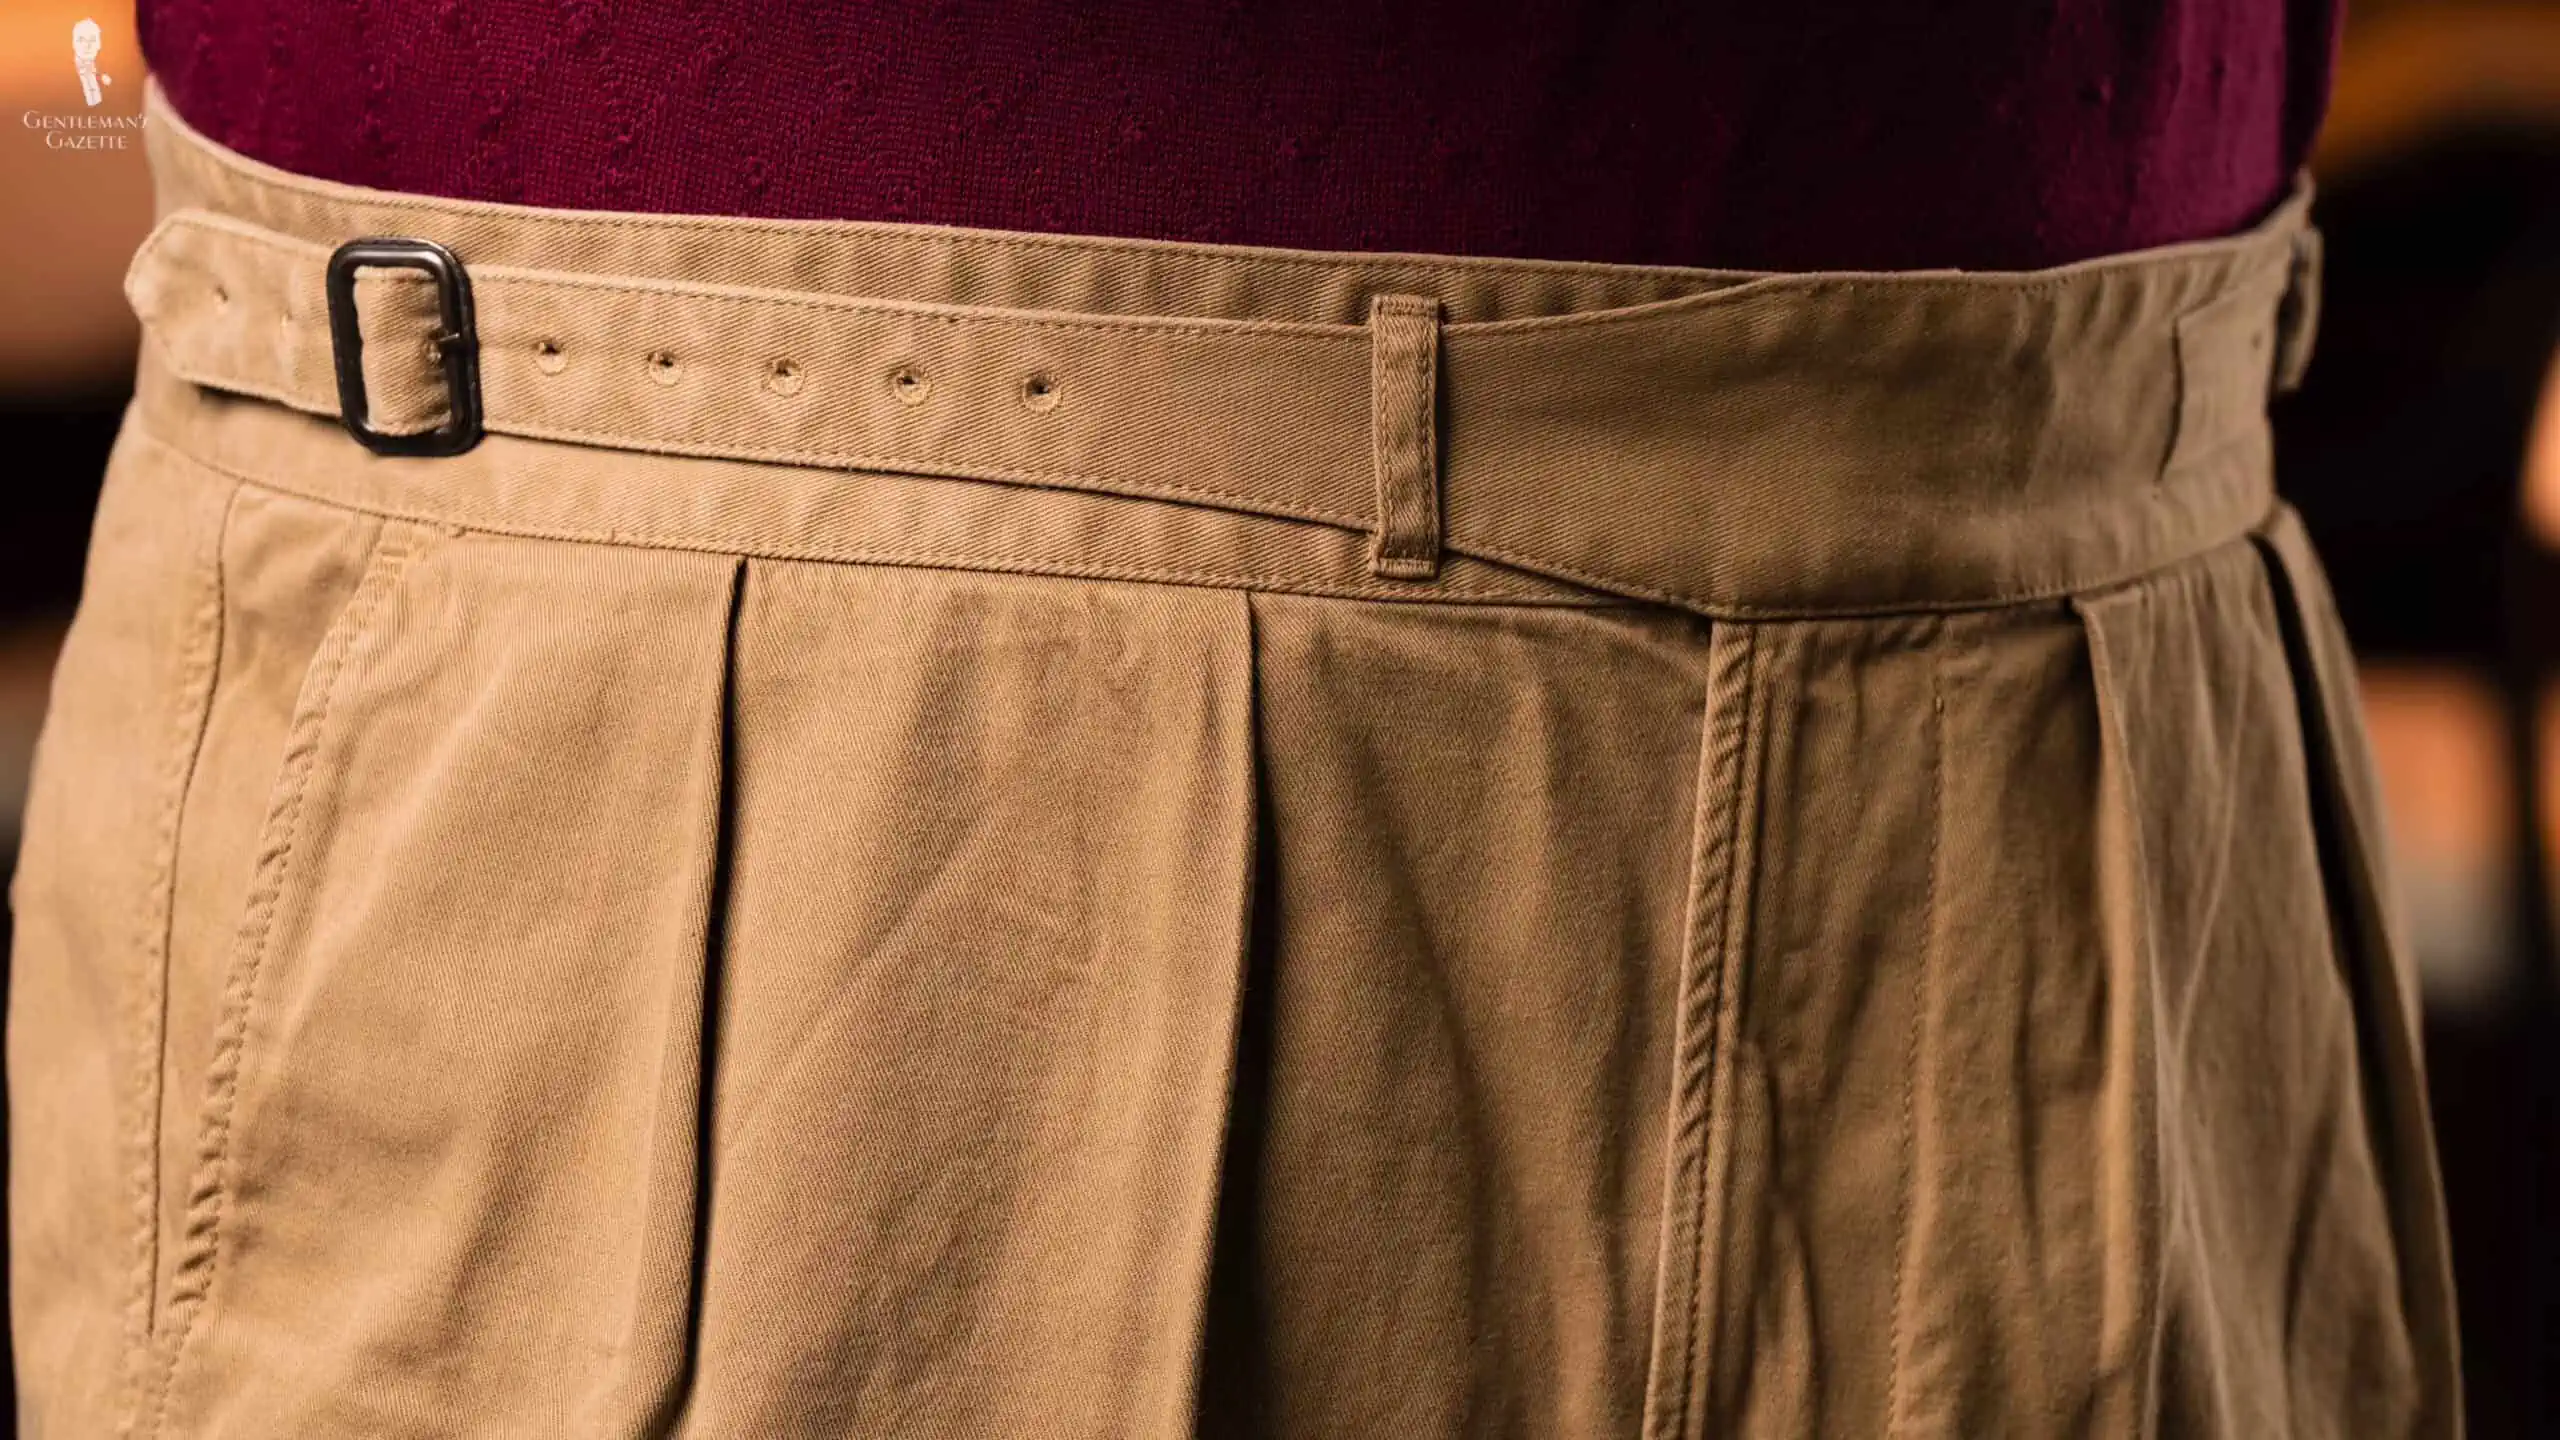 Single extended waistband Gurkha trousers with metal buckle for adjustments.